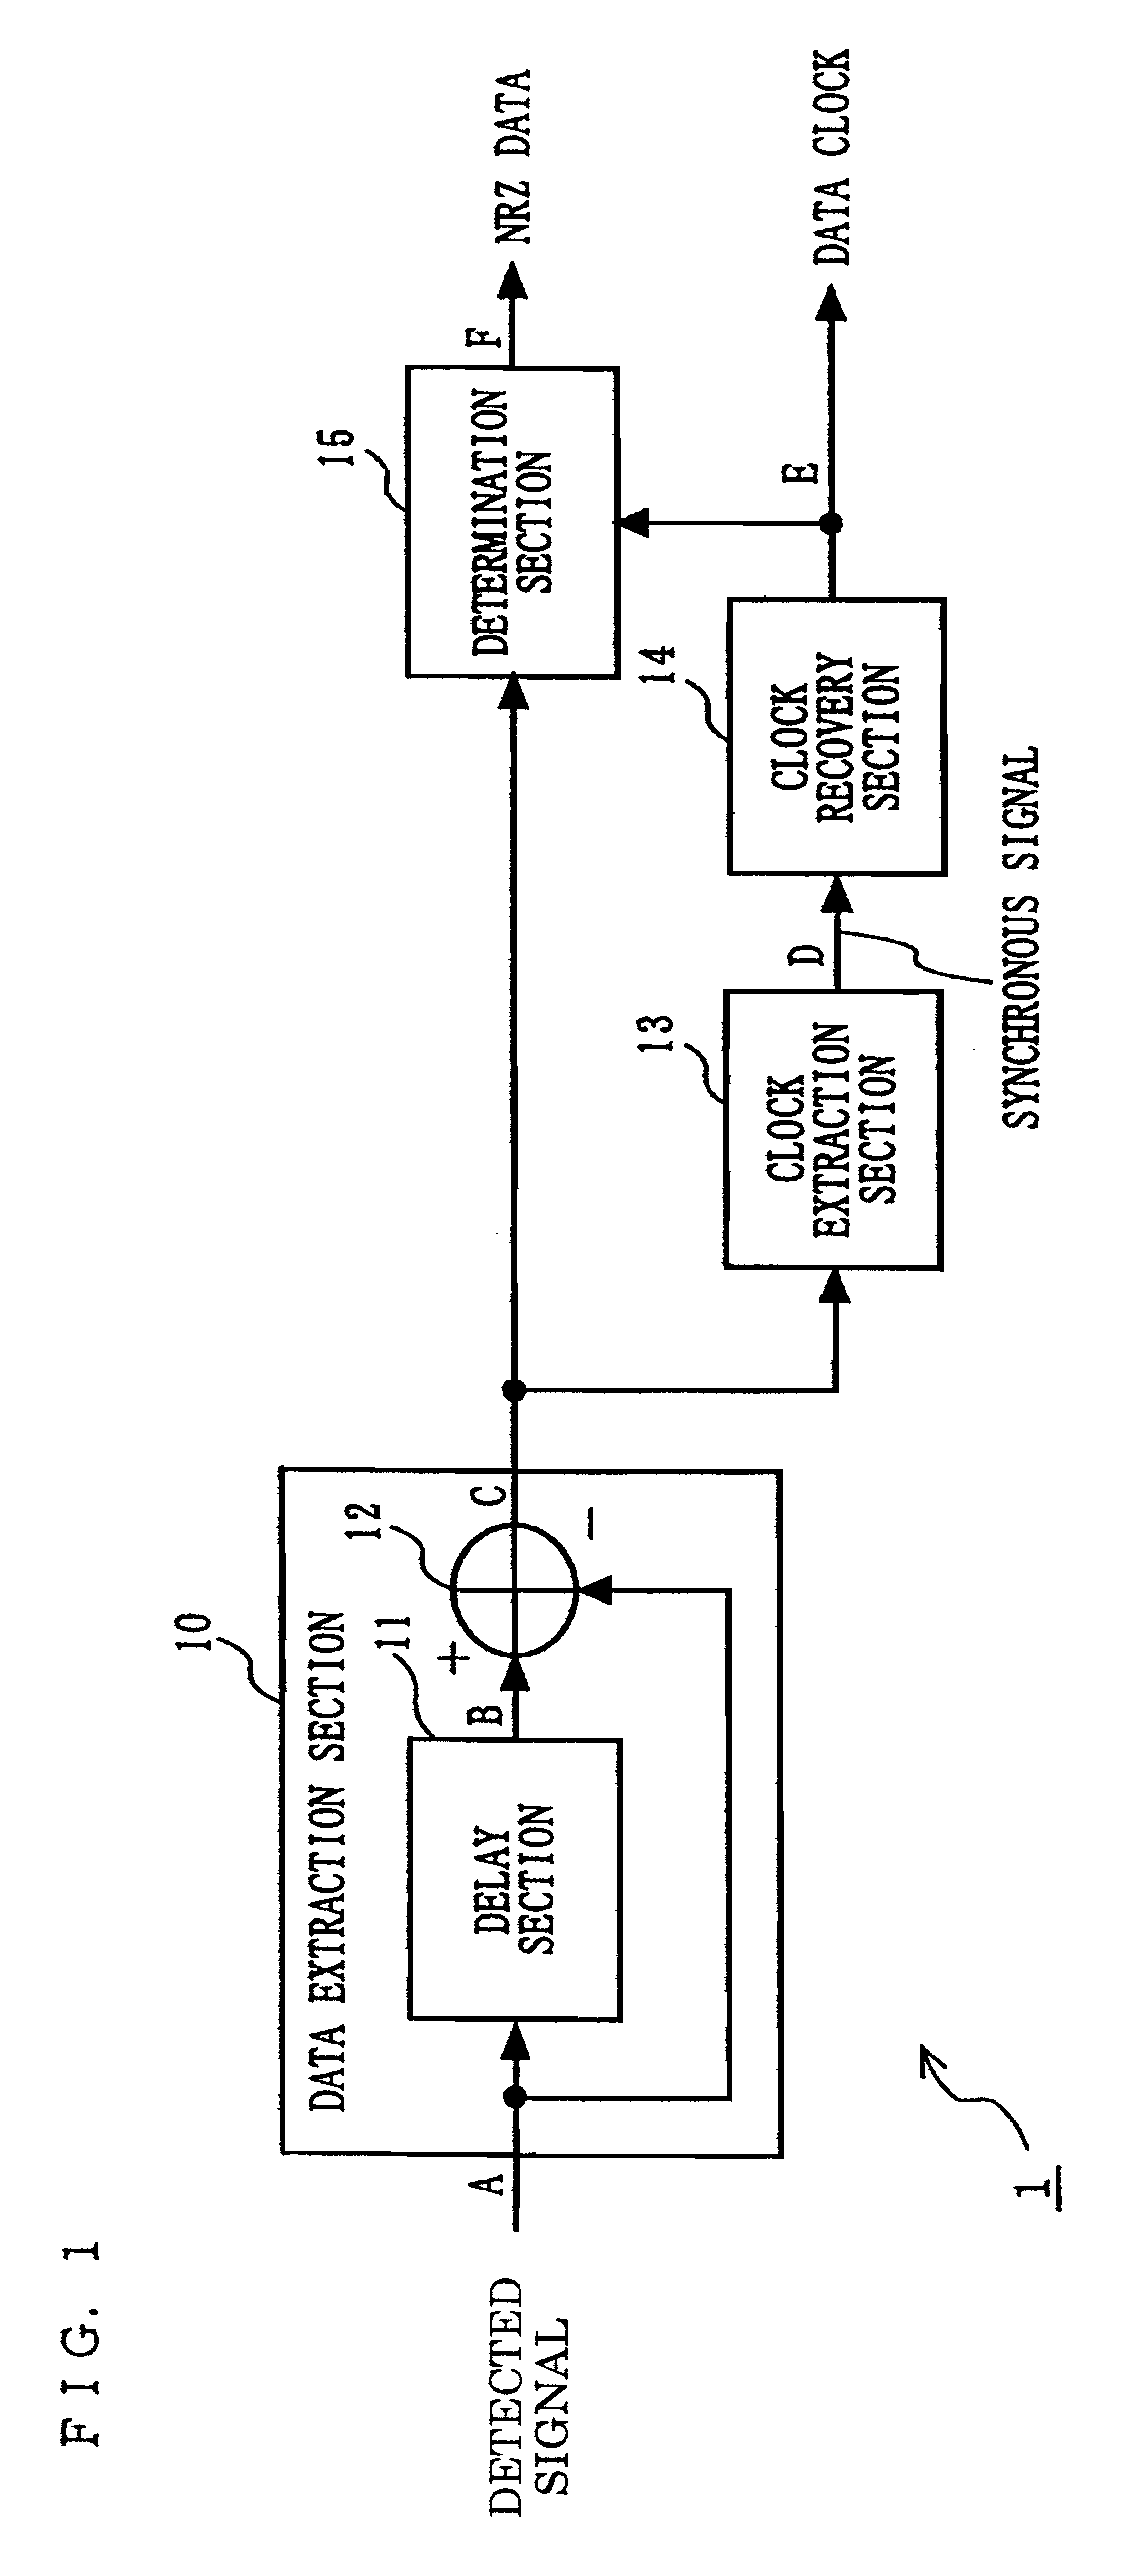 Ask demodulation device and wireless device using the same